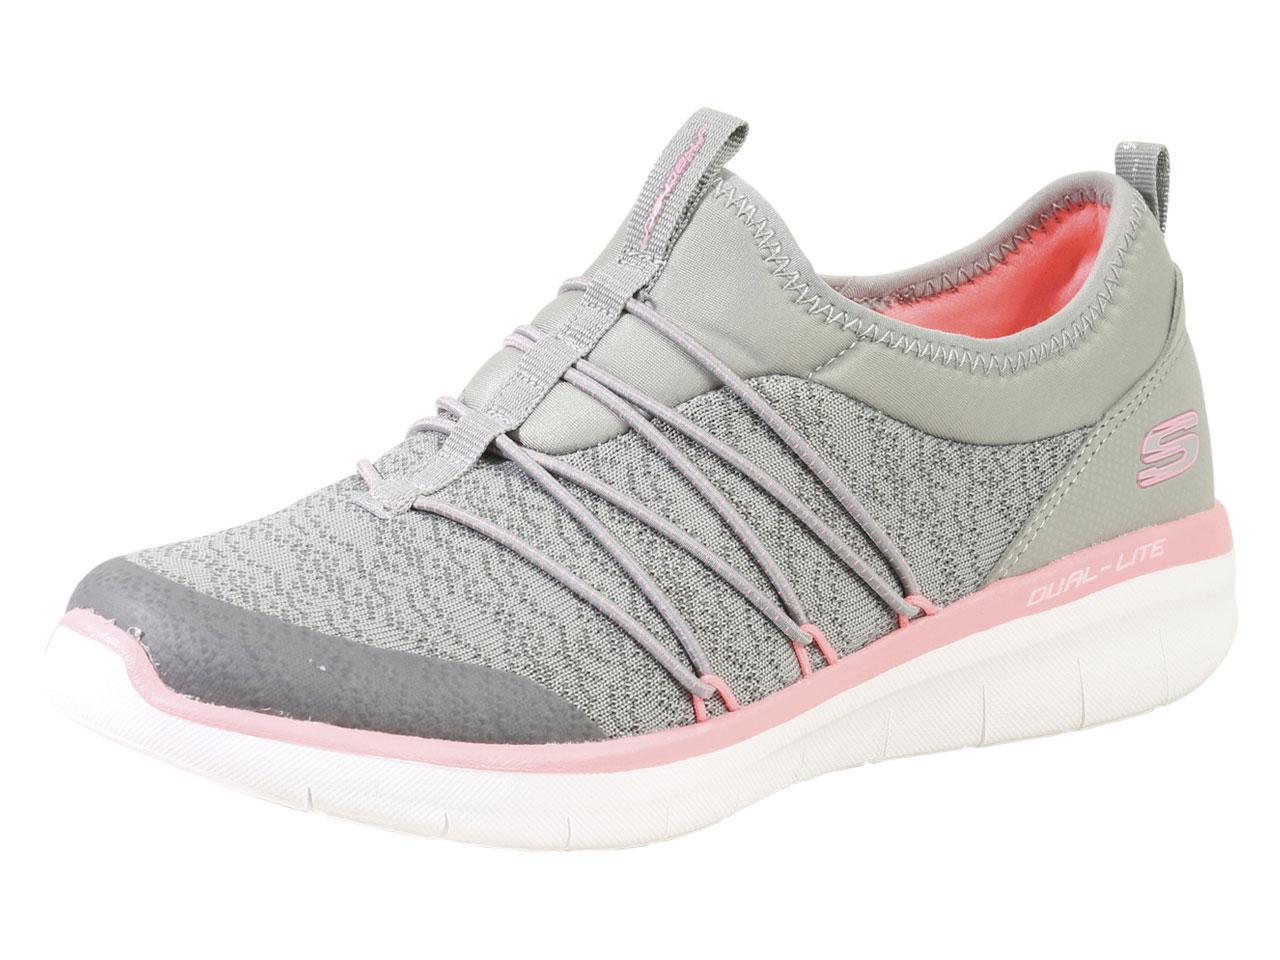 Skechers Women's Synergy 2.0 Simply Chic Memory Foam Sneakers Shoes - Gray/Pink - 6.5 B(M) US